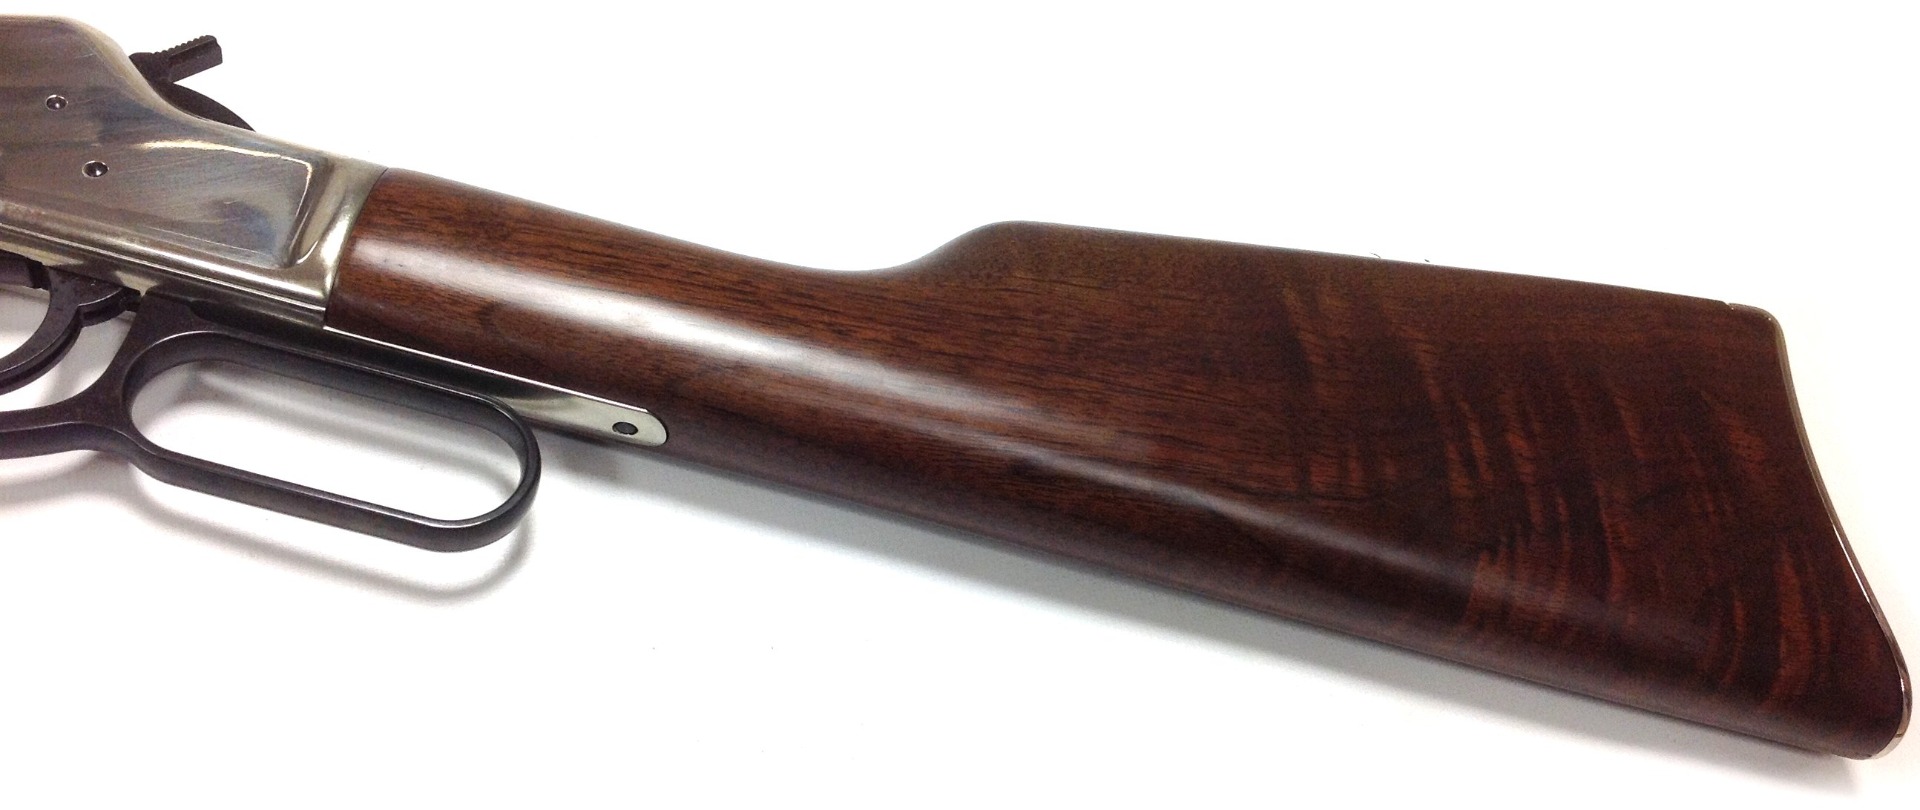 Henry Lever Action Rifles For Sale UK